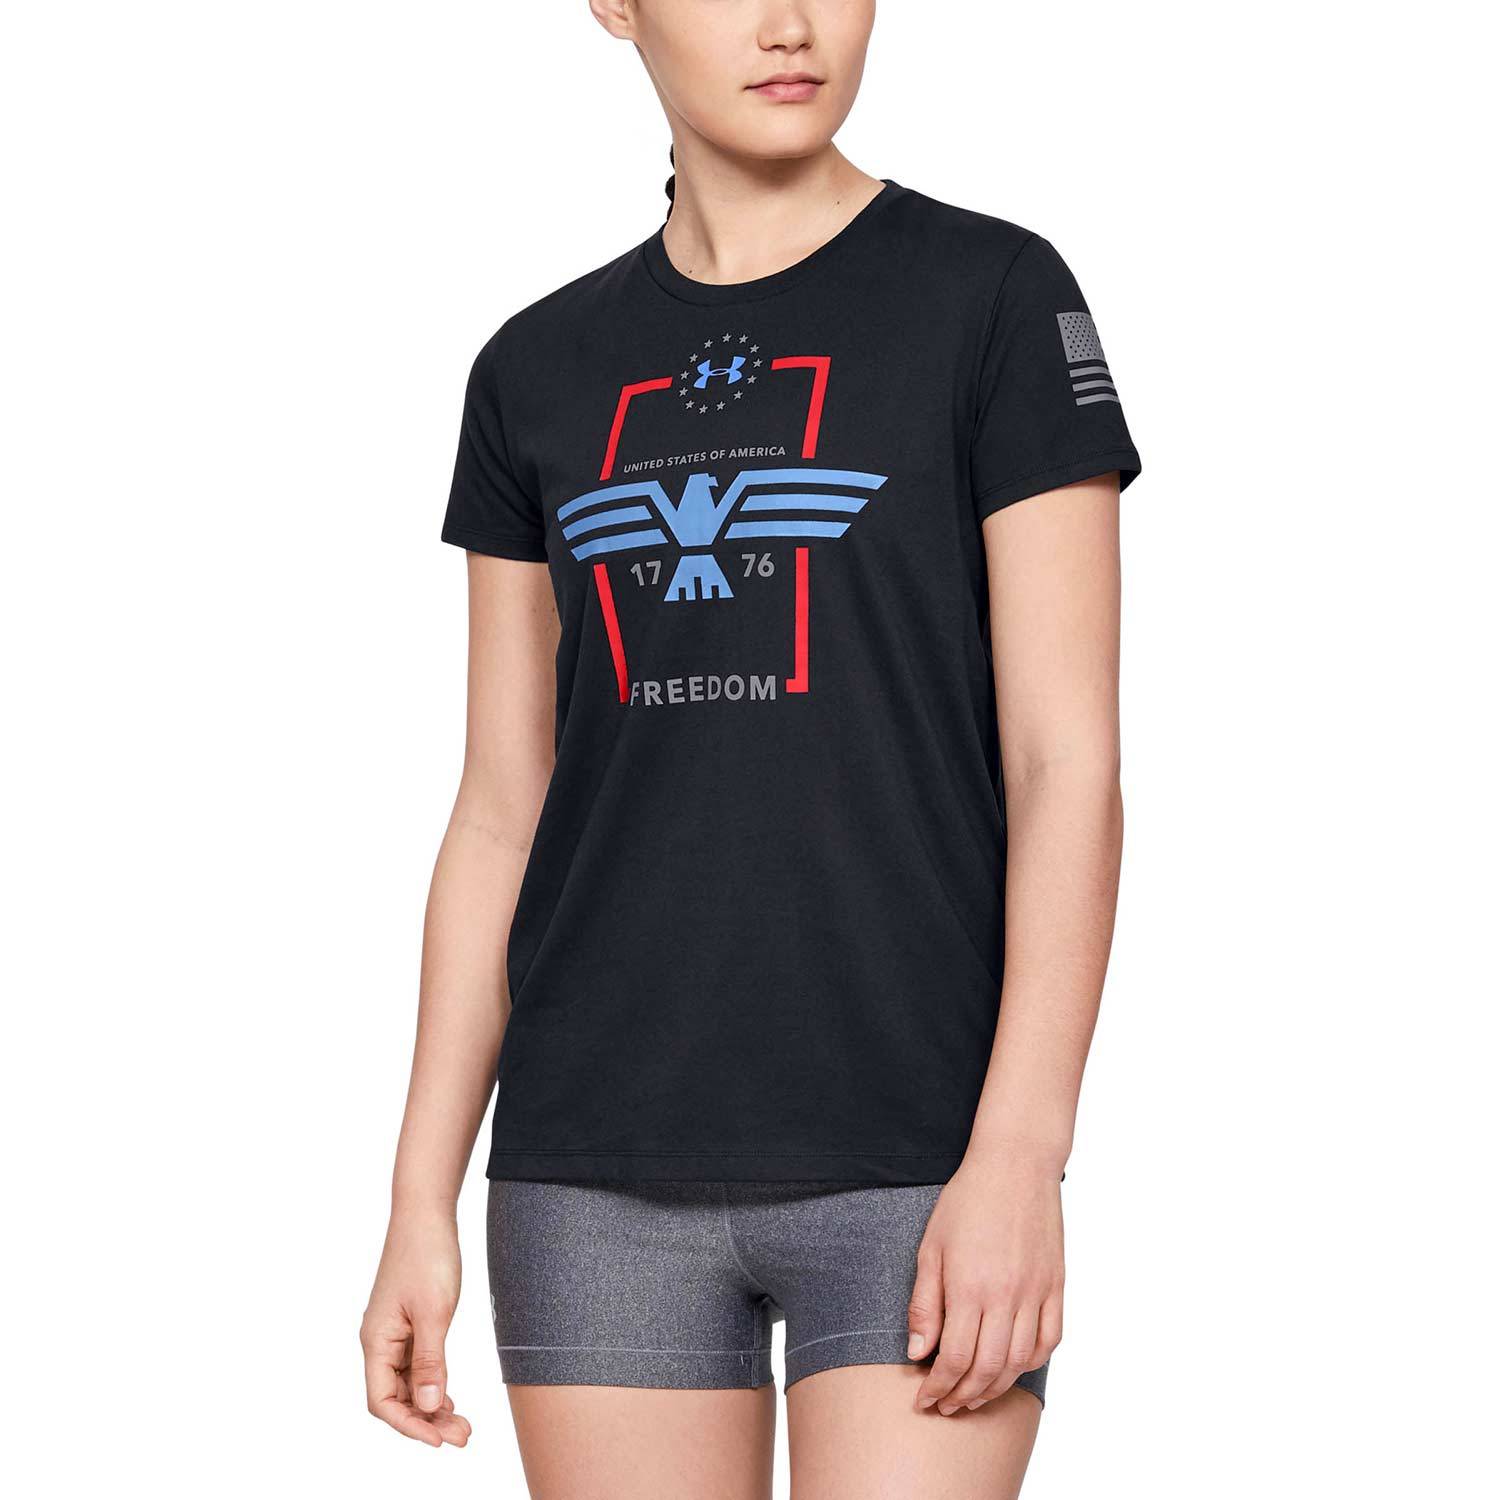 UNDER ARMOUR WOMEN’S FREEDOM EAGLE GRAPHIC T-SHIRT